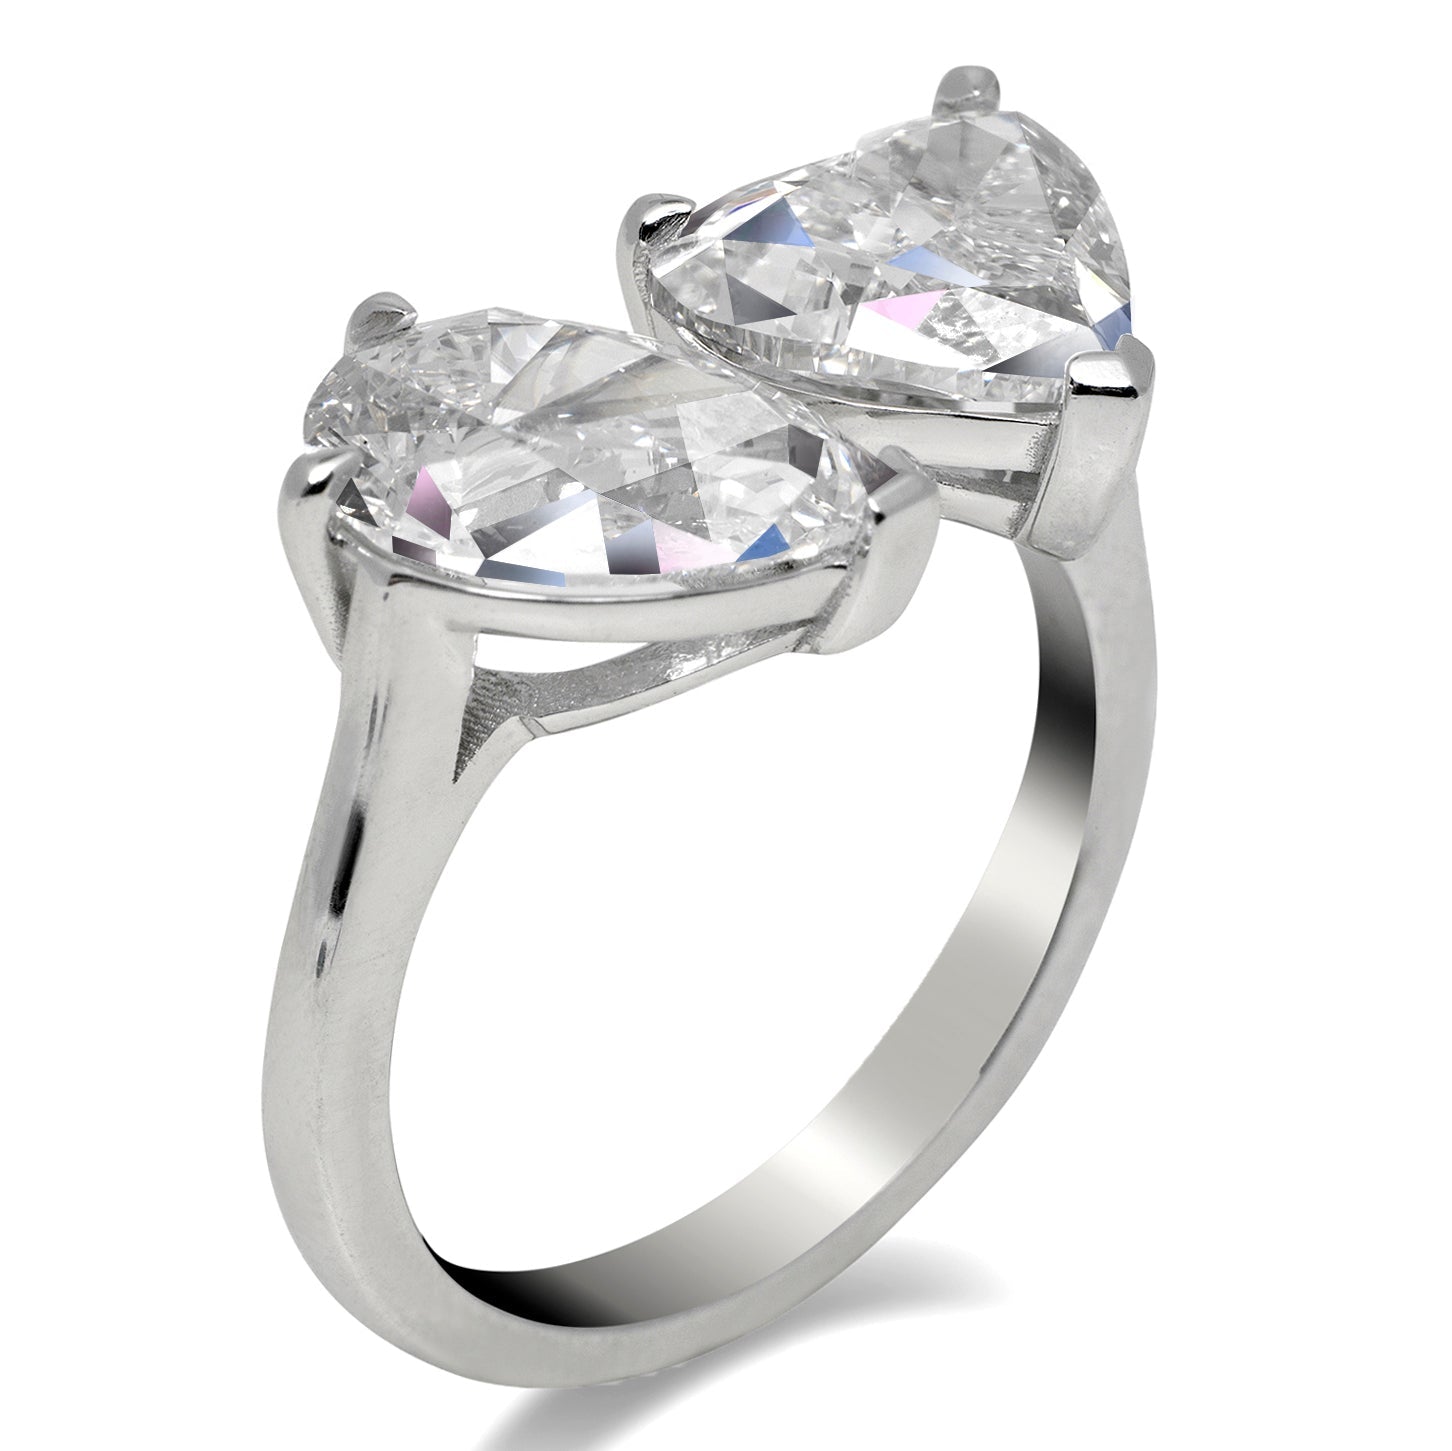 Diamond Ring Pear & Heart-Shaped 4 Carat Solitaire Diamond Ring in 18K White Gold Side View